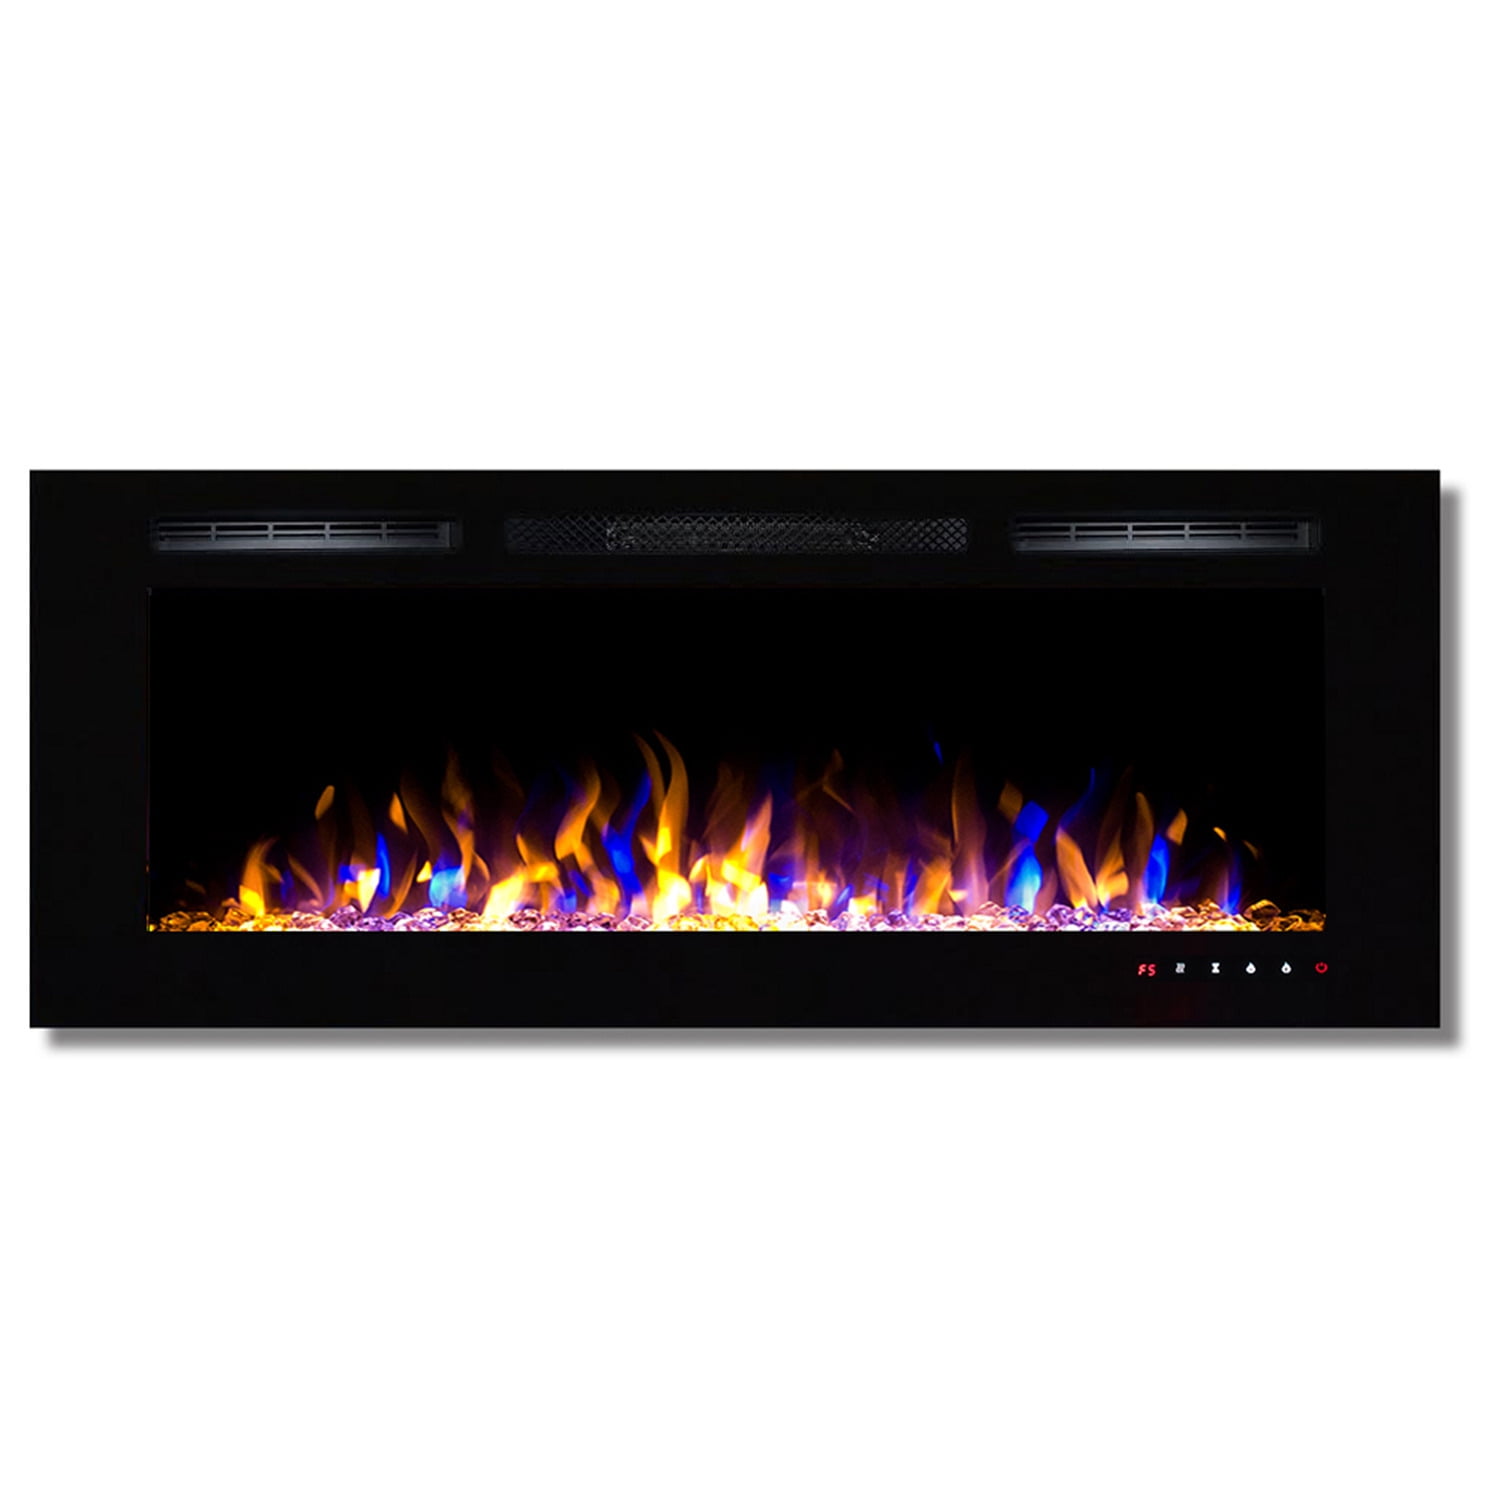 Regal Flame Fusion 50" Multi-Color Built-in Ventless Recessed Wall Mounted Electric Fireplace Better Than Wood Fireplaces, Gas L